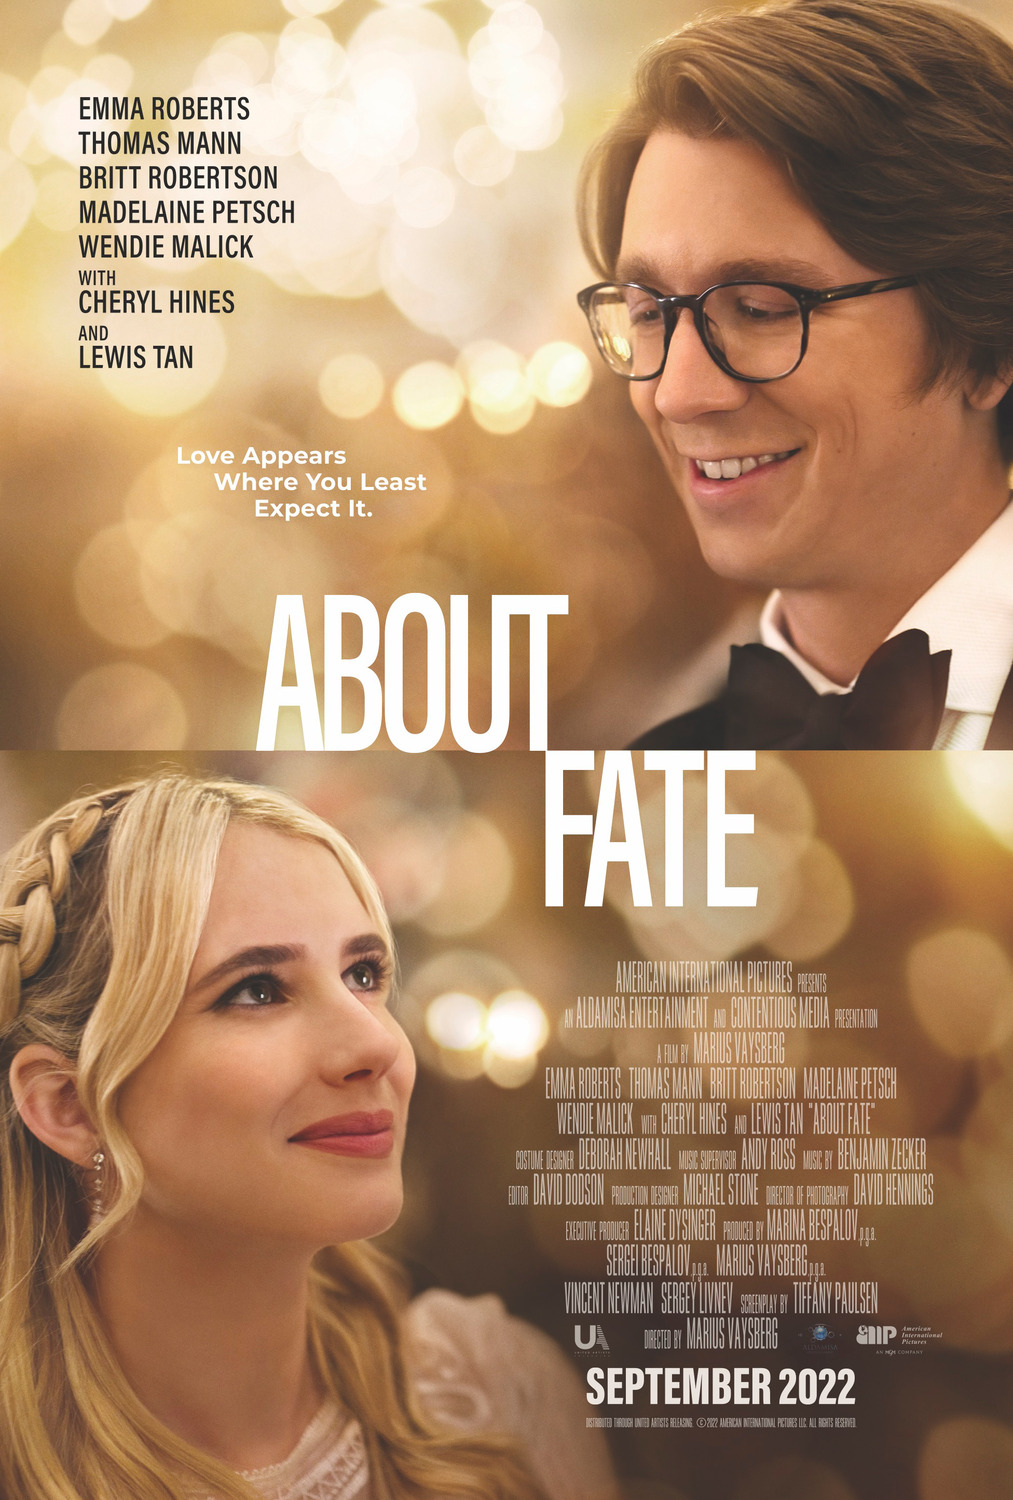 About Fate Trailer & Poster